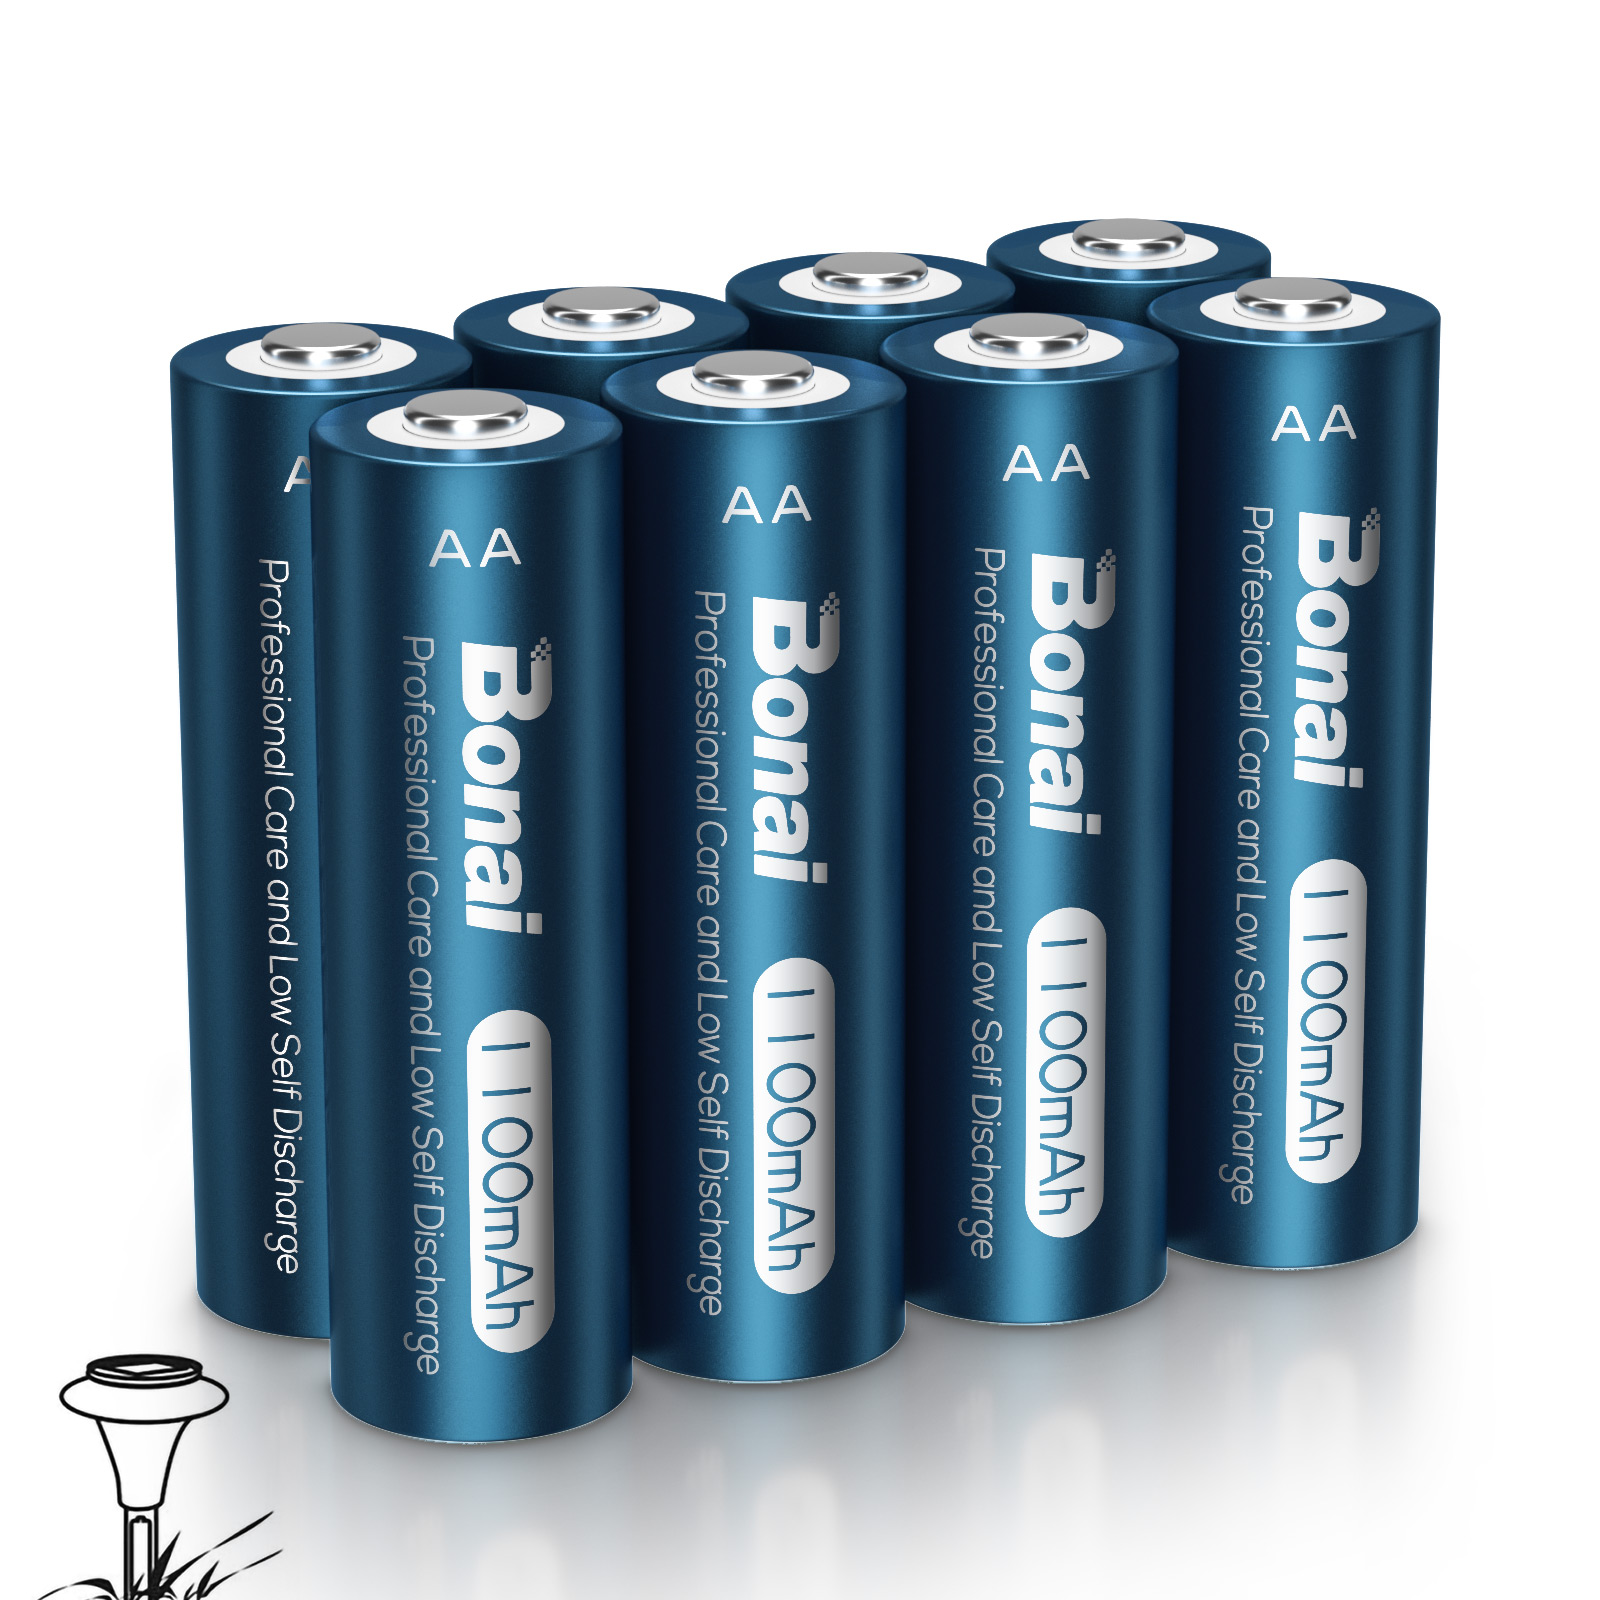 BONAI AAA Rechargeable Solar Batteries 600mAh High Capacity AAA Rechargeable Batteries for Solar Lights Replacement (AAA 8 Pack)